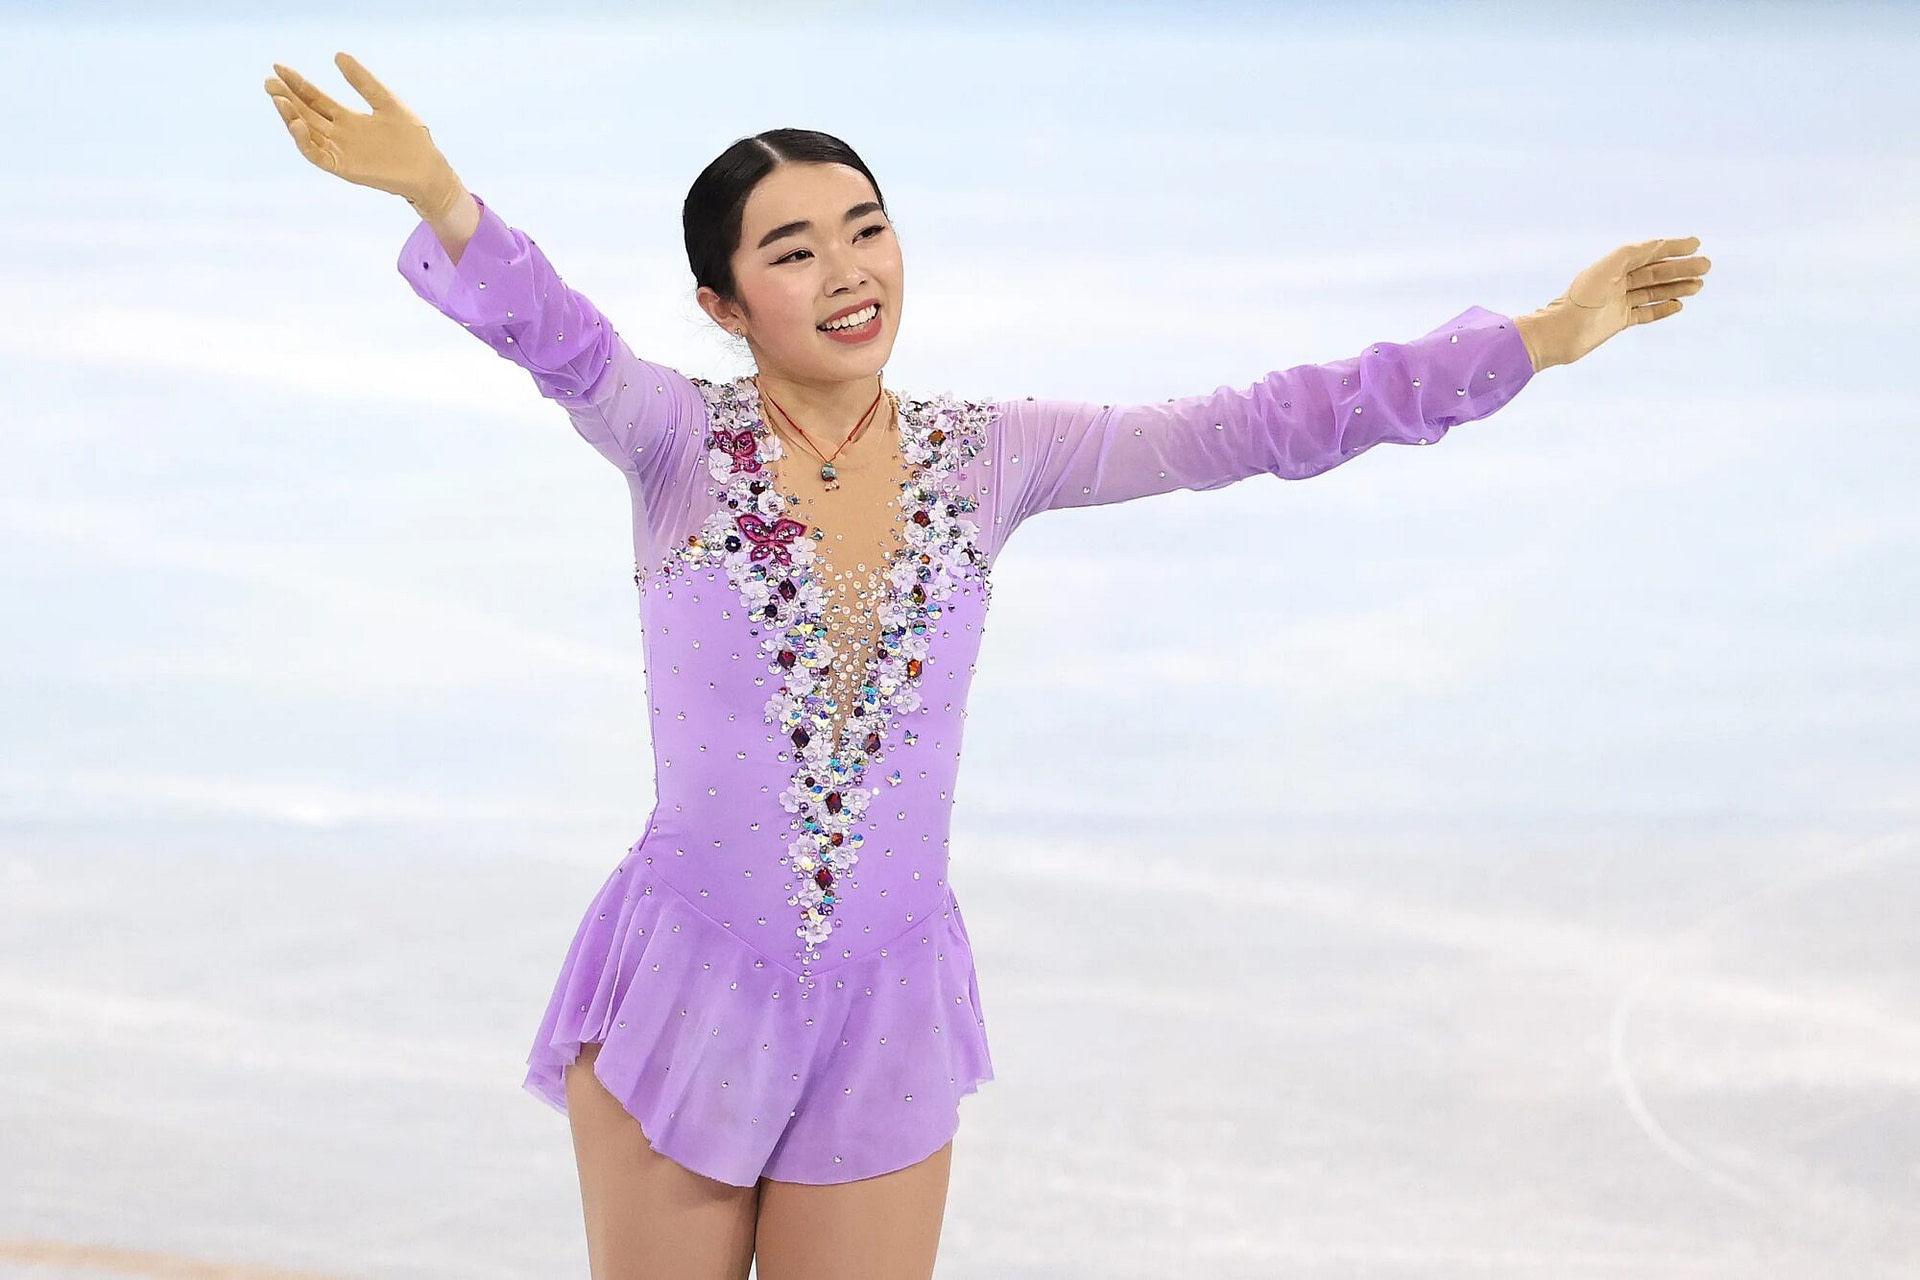 Karen Chen Clinches Olympic Gold After Two-Year Anticipation